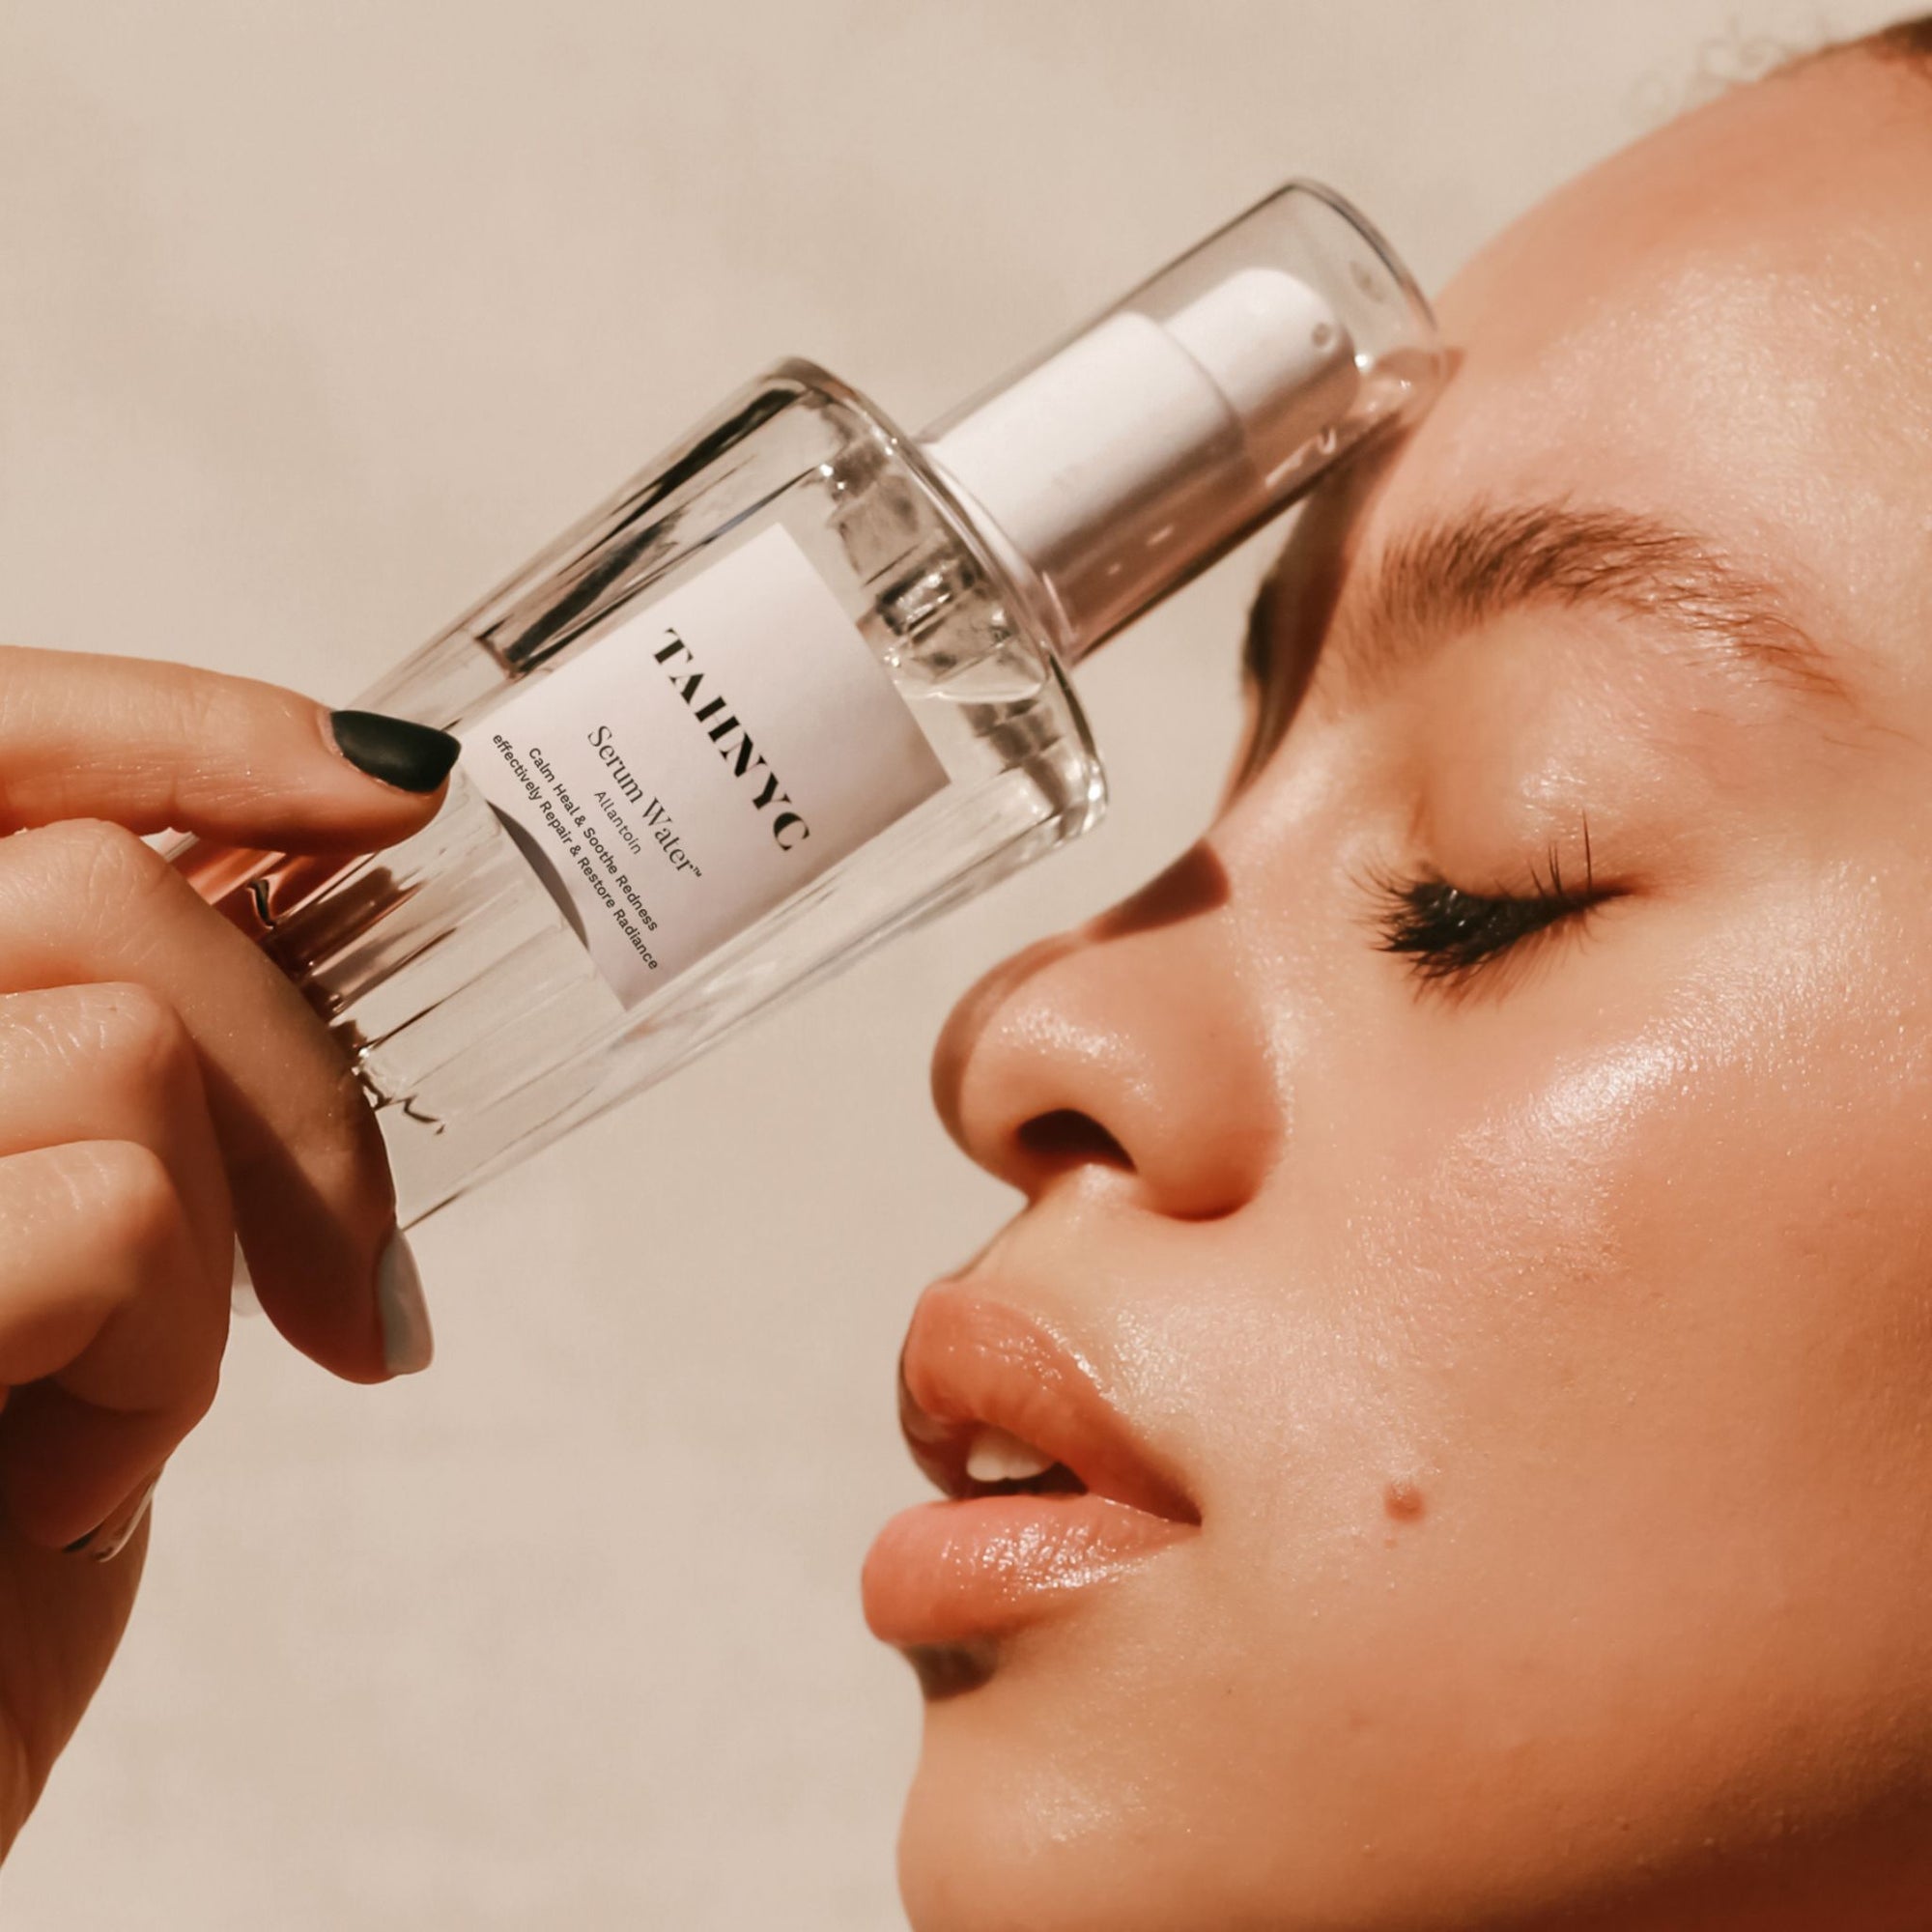 Tahnyc Allantoin Serum Water Calms and Soothes Redness for even the Most Sensitive Skin | Canada